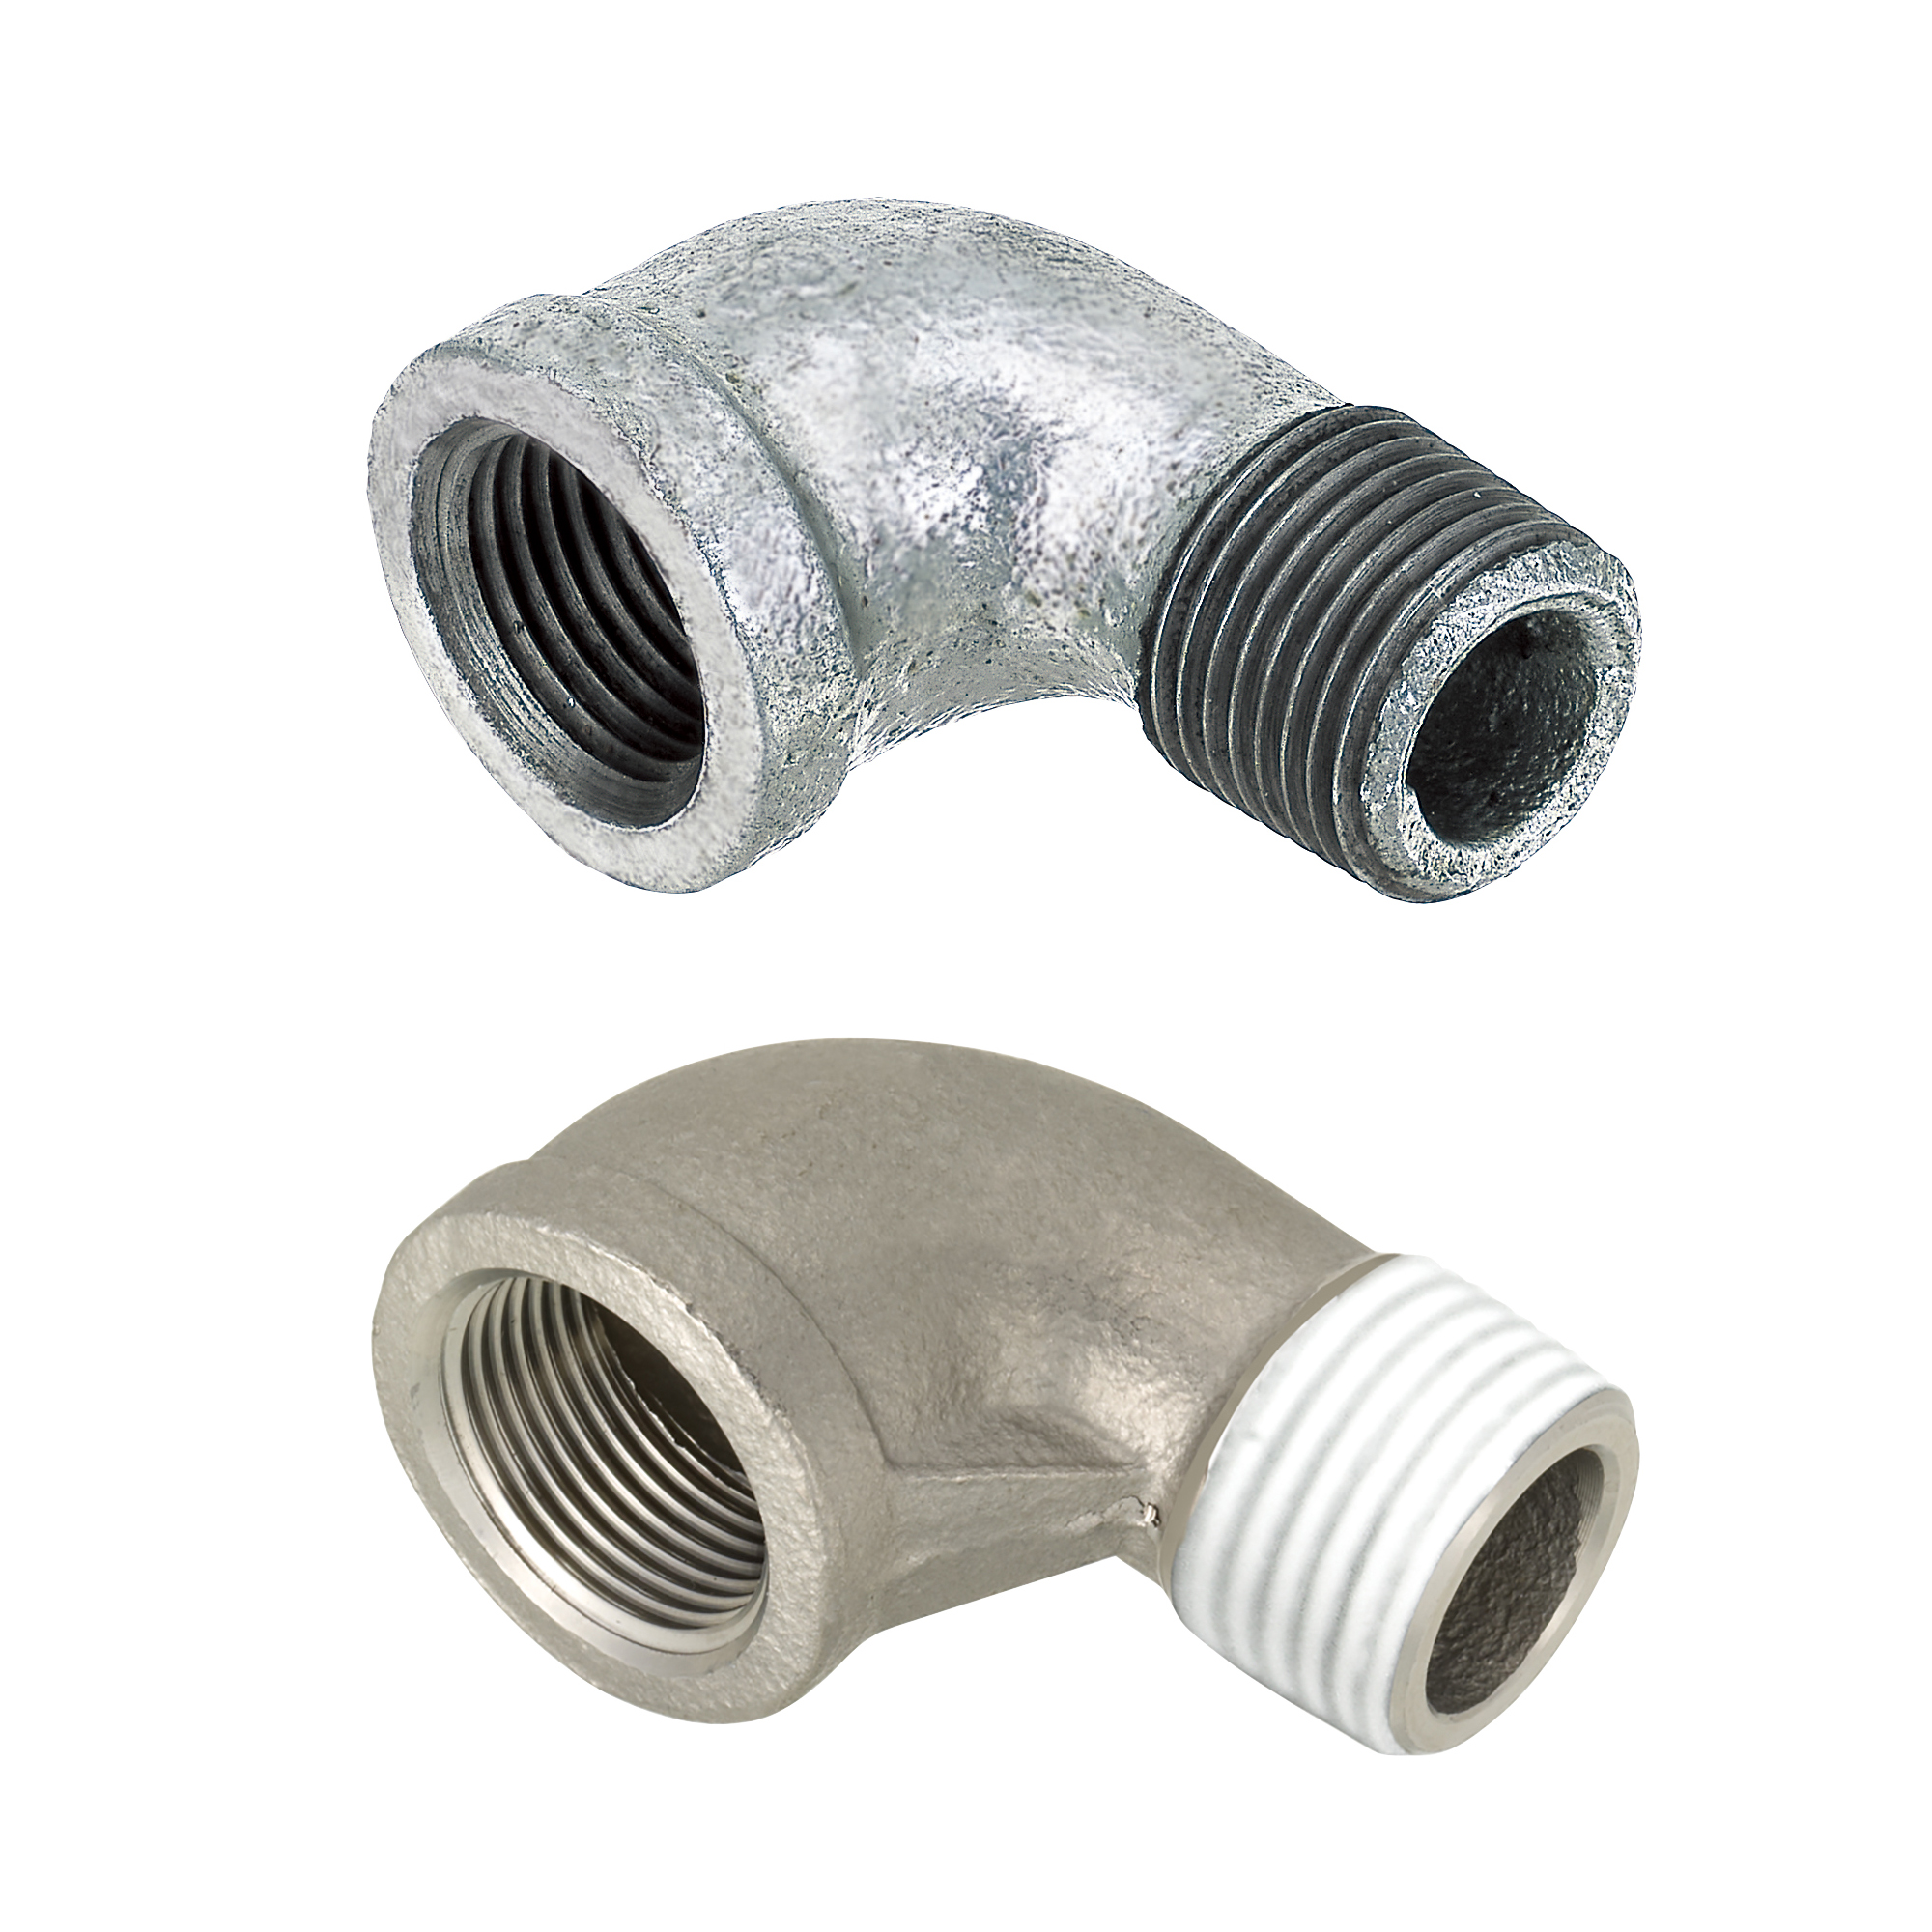 Low Pressure Fittings/90 Deg. Elbow/Threaded and Tapped (SUTPEL40A) 